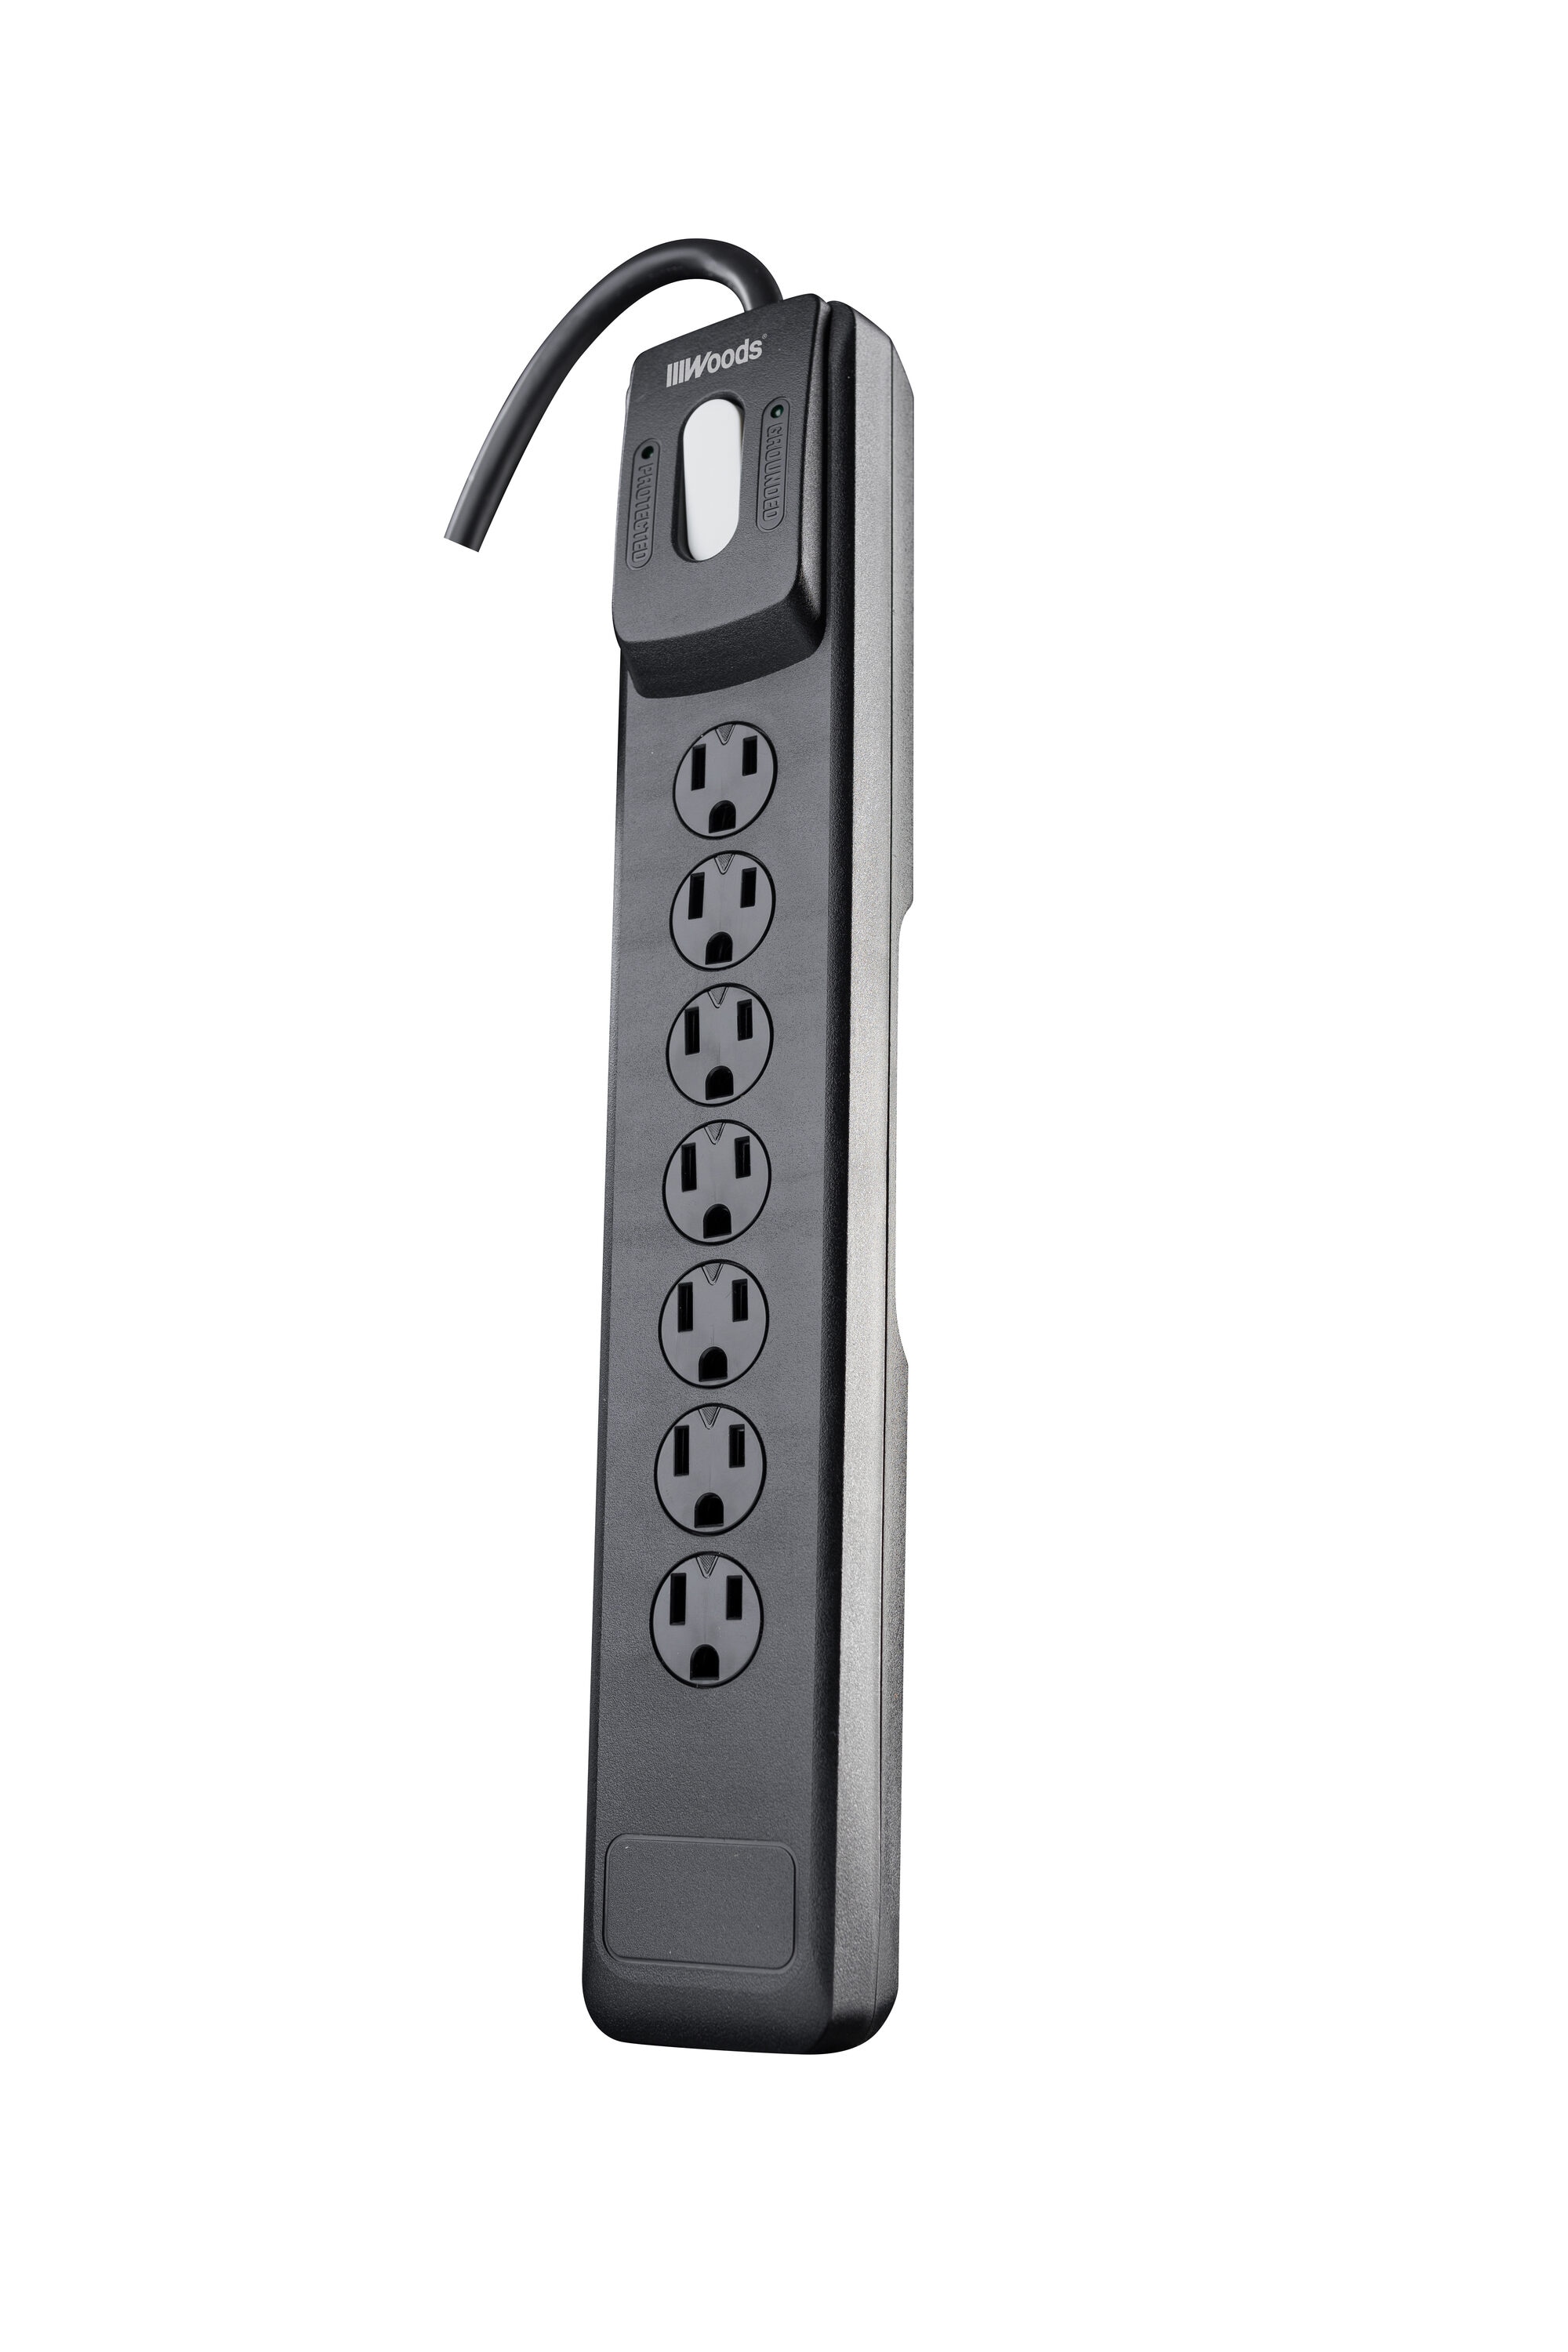 Woods Appliance 1-Outlet 900-Joule Surge Protector with Alarm